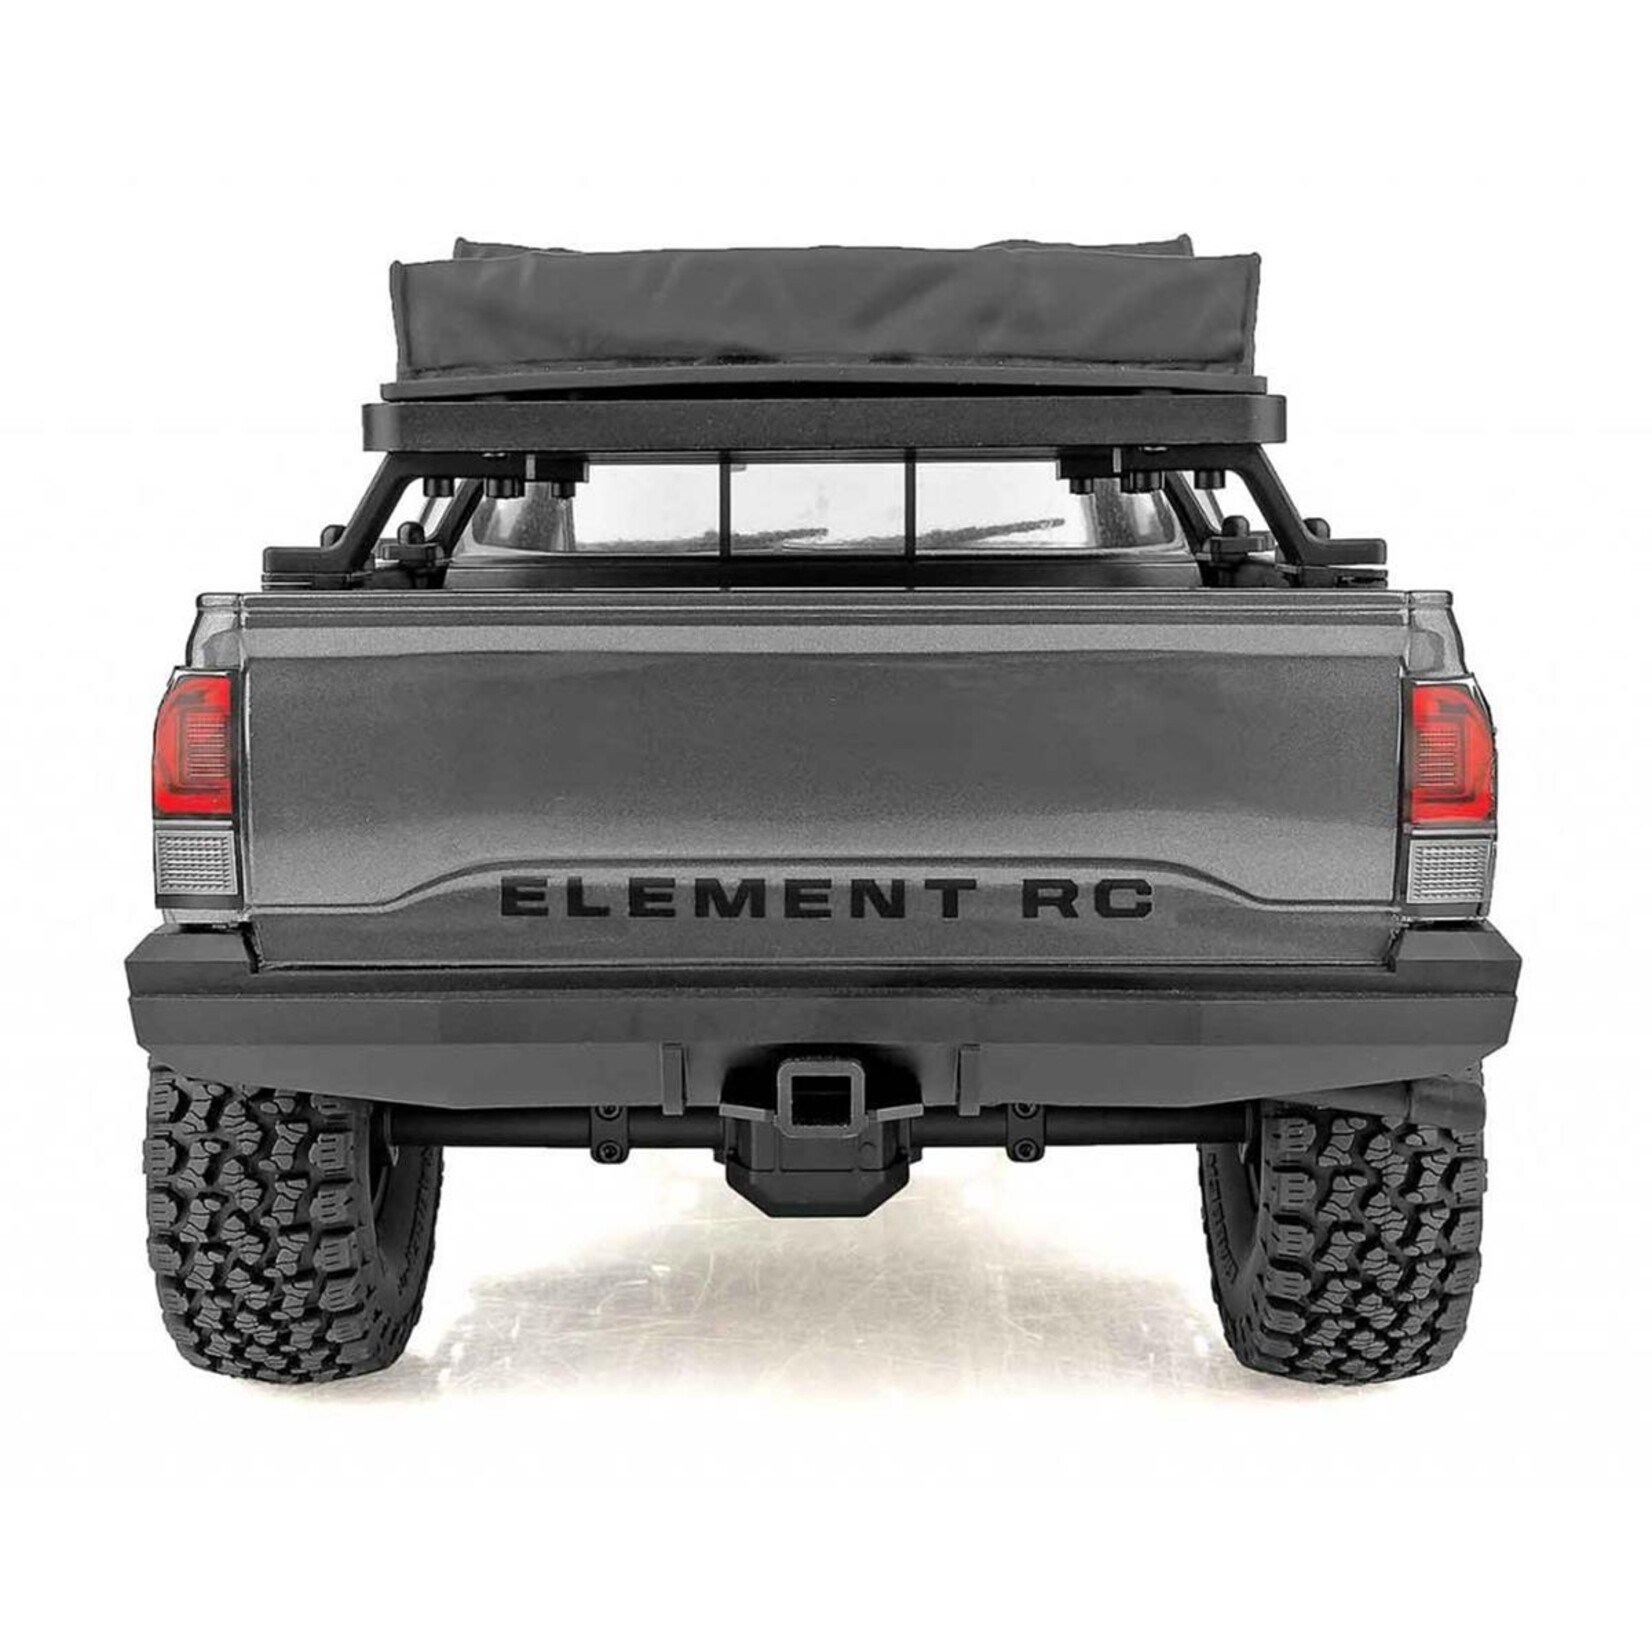 Element RC Element RC Enduro Knightrunner 4x4 RTR 1/10 Rock Crawler Combo w/2.4GHz Radio, Battery & Charger #40113C